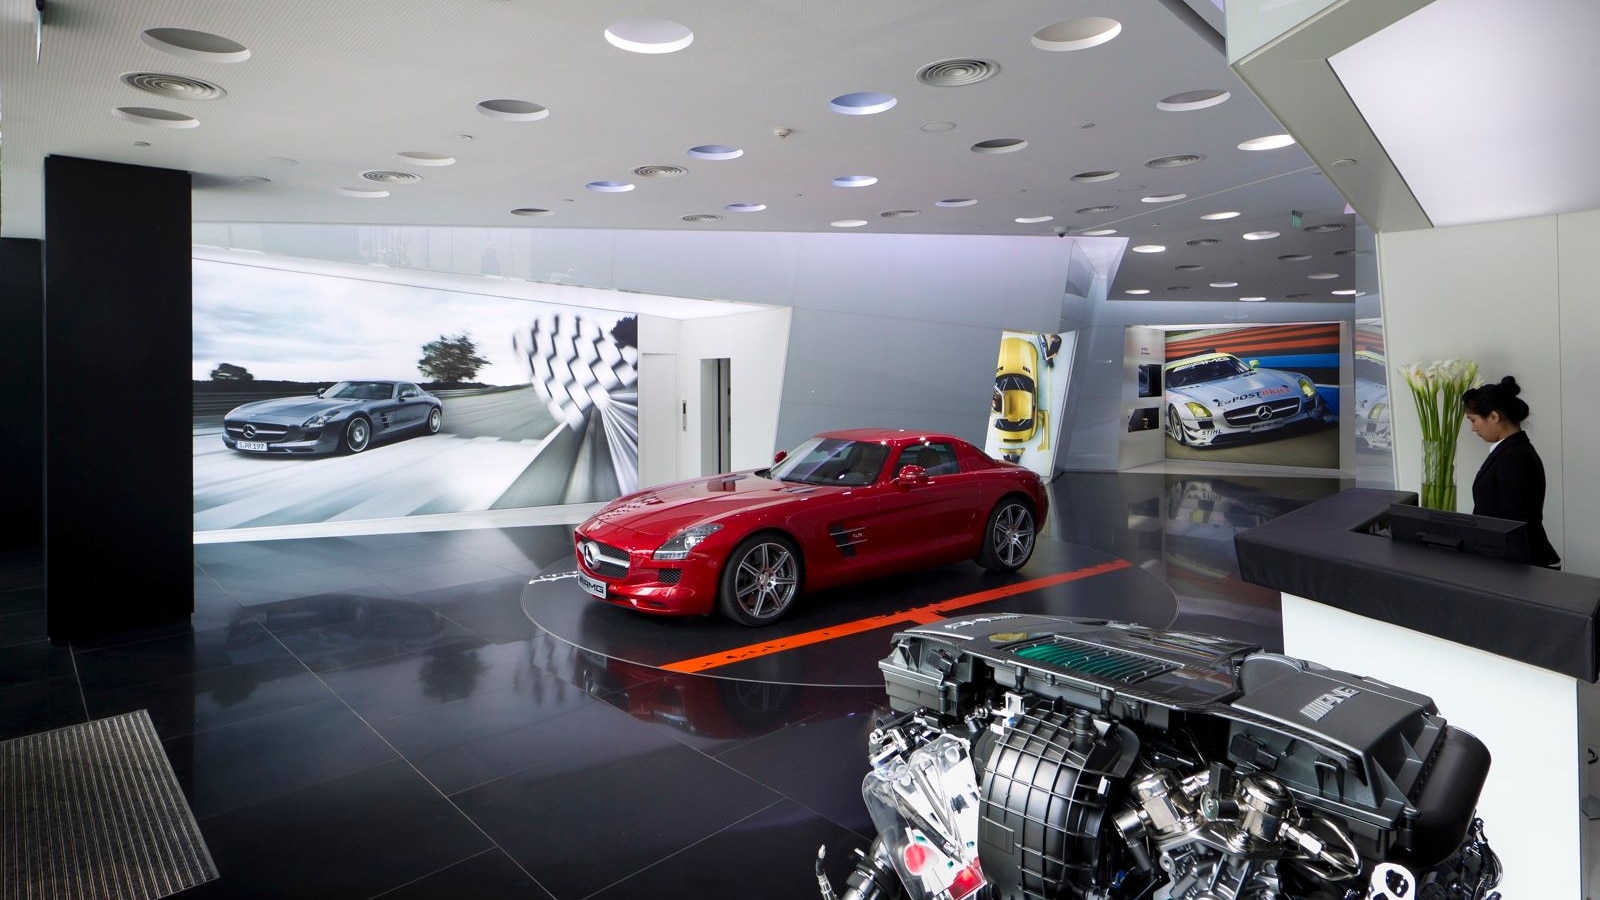 AMG's first stand alone dealership, the Beijing Sanlitun AMG Performance Center